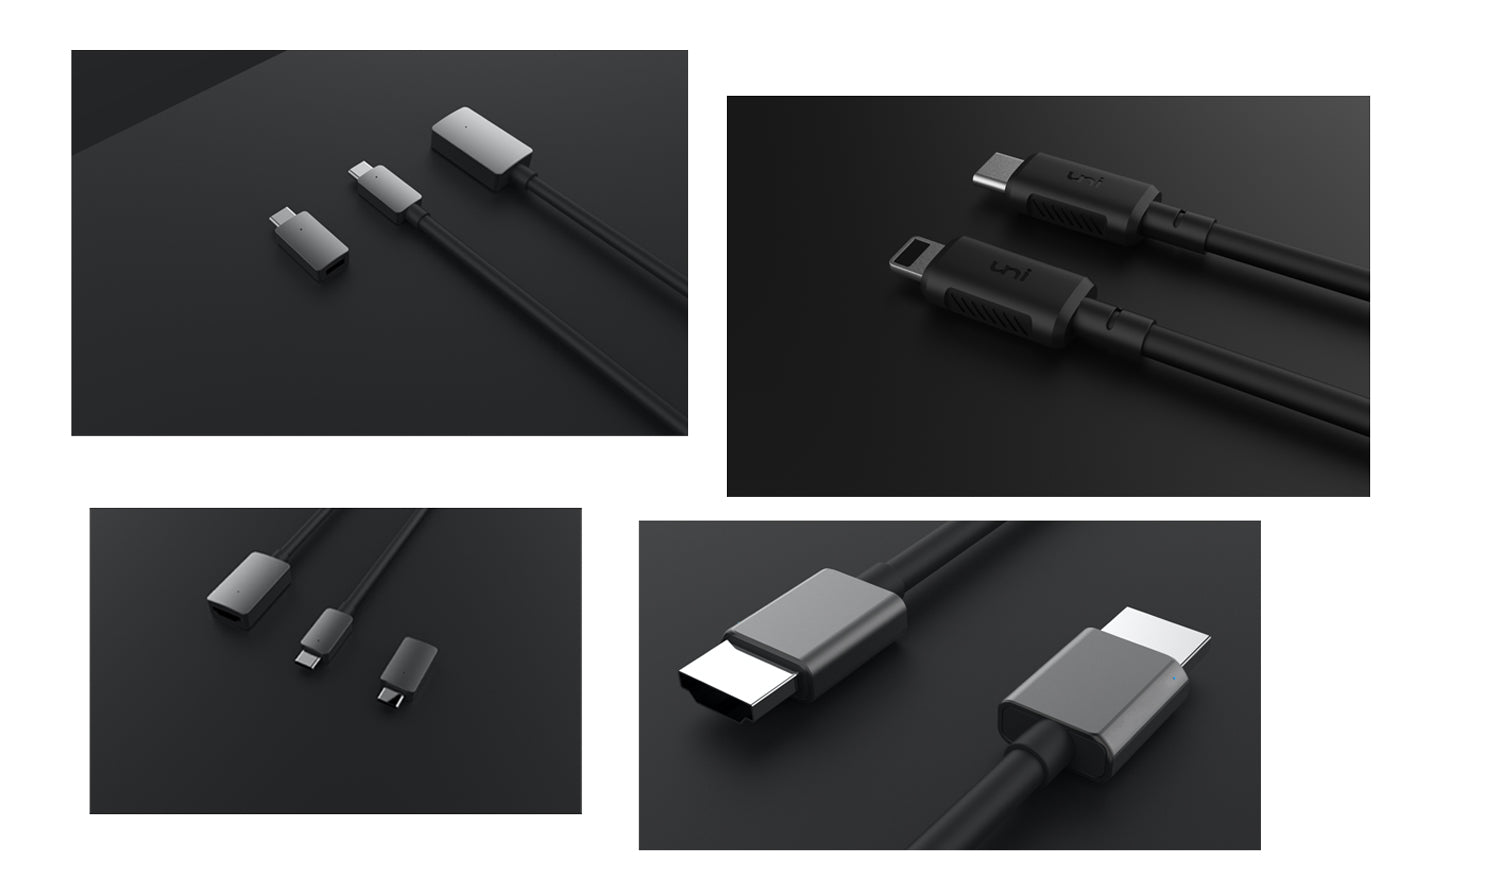 Hearing more demand for a richer product line around the USB-C interface, offers more options for basic cables. 